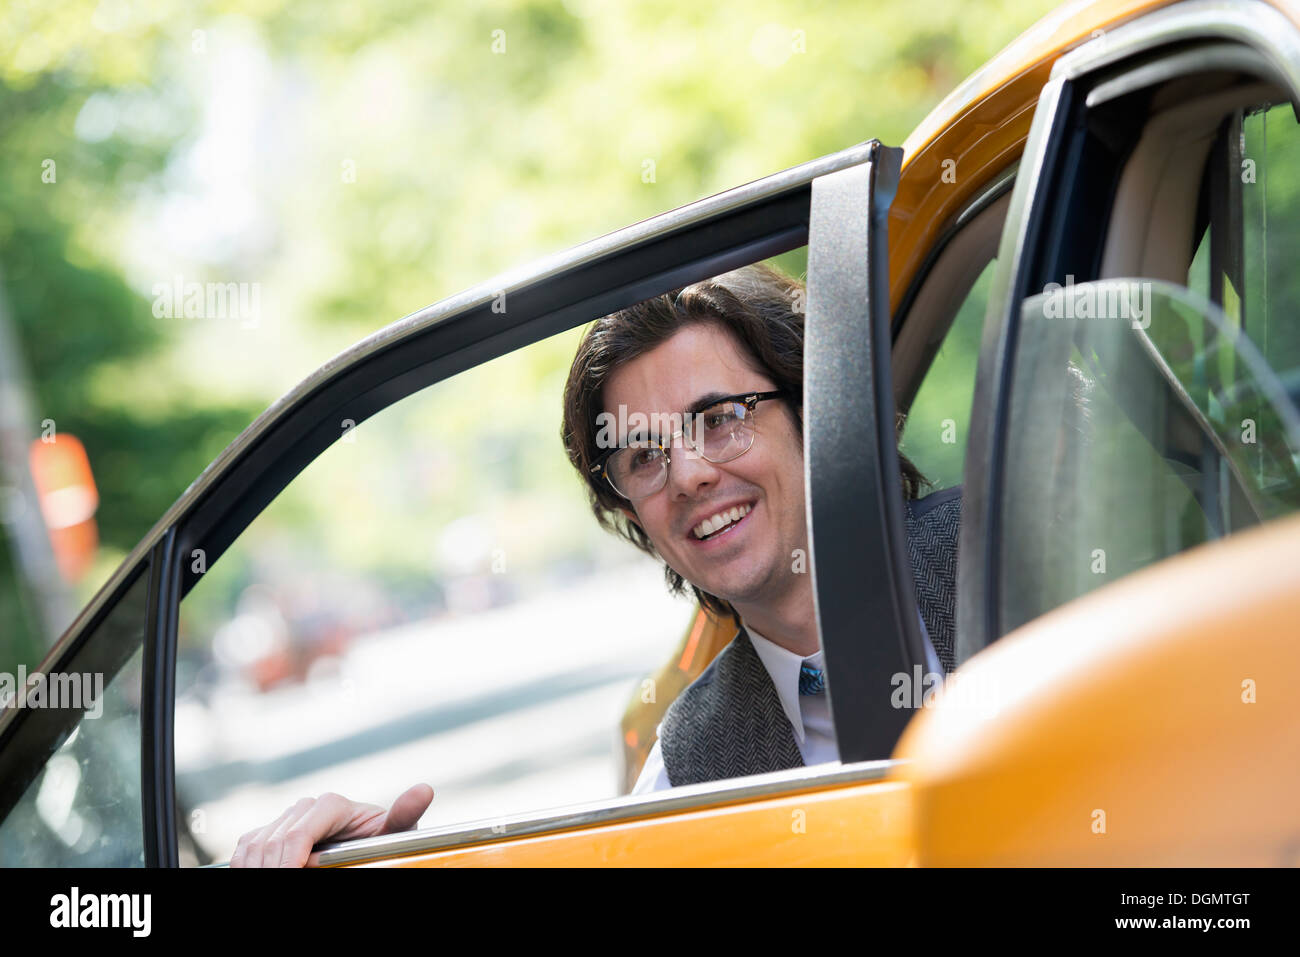 City life. People on the move. A young man in the back seat of a taxi. Stock Photo